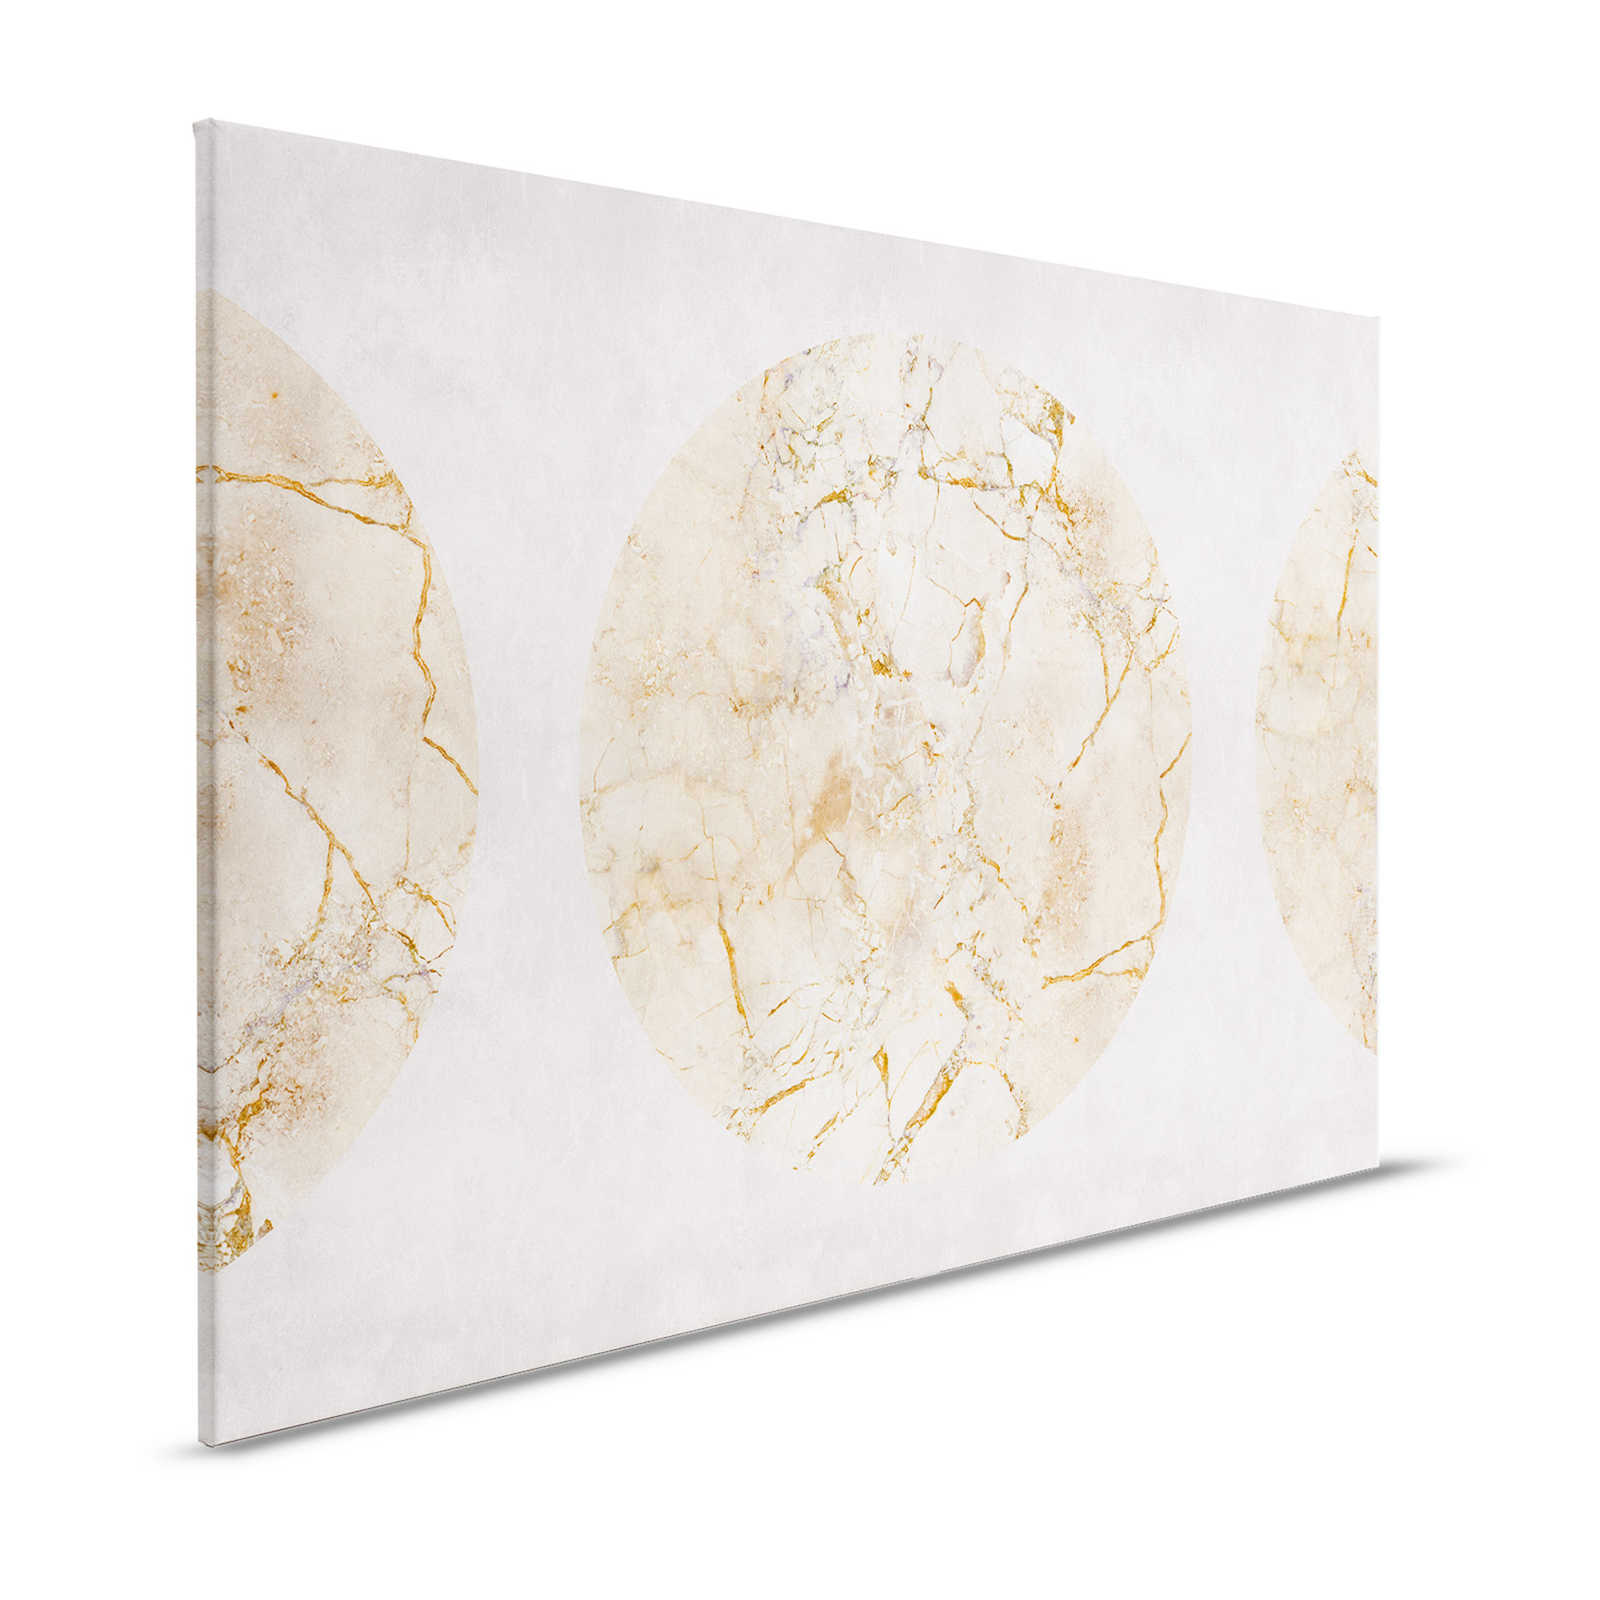 Venus 1 - Canvas painting golden marble with circle motif & plaster look - 1.20 m x 0.80 m
